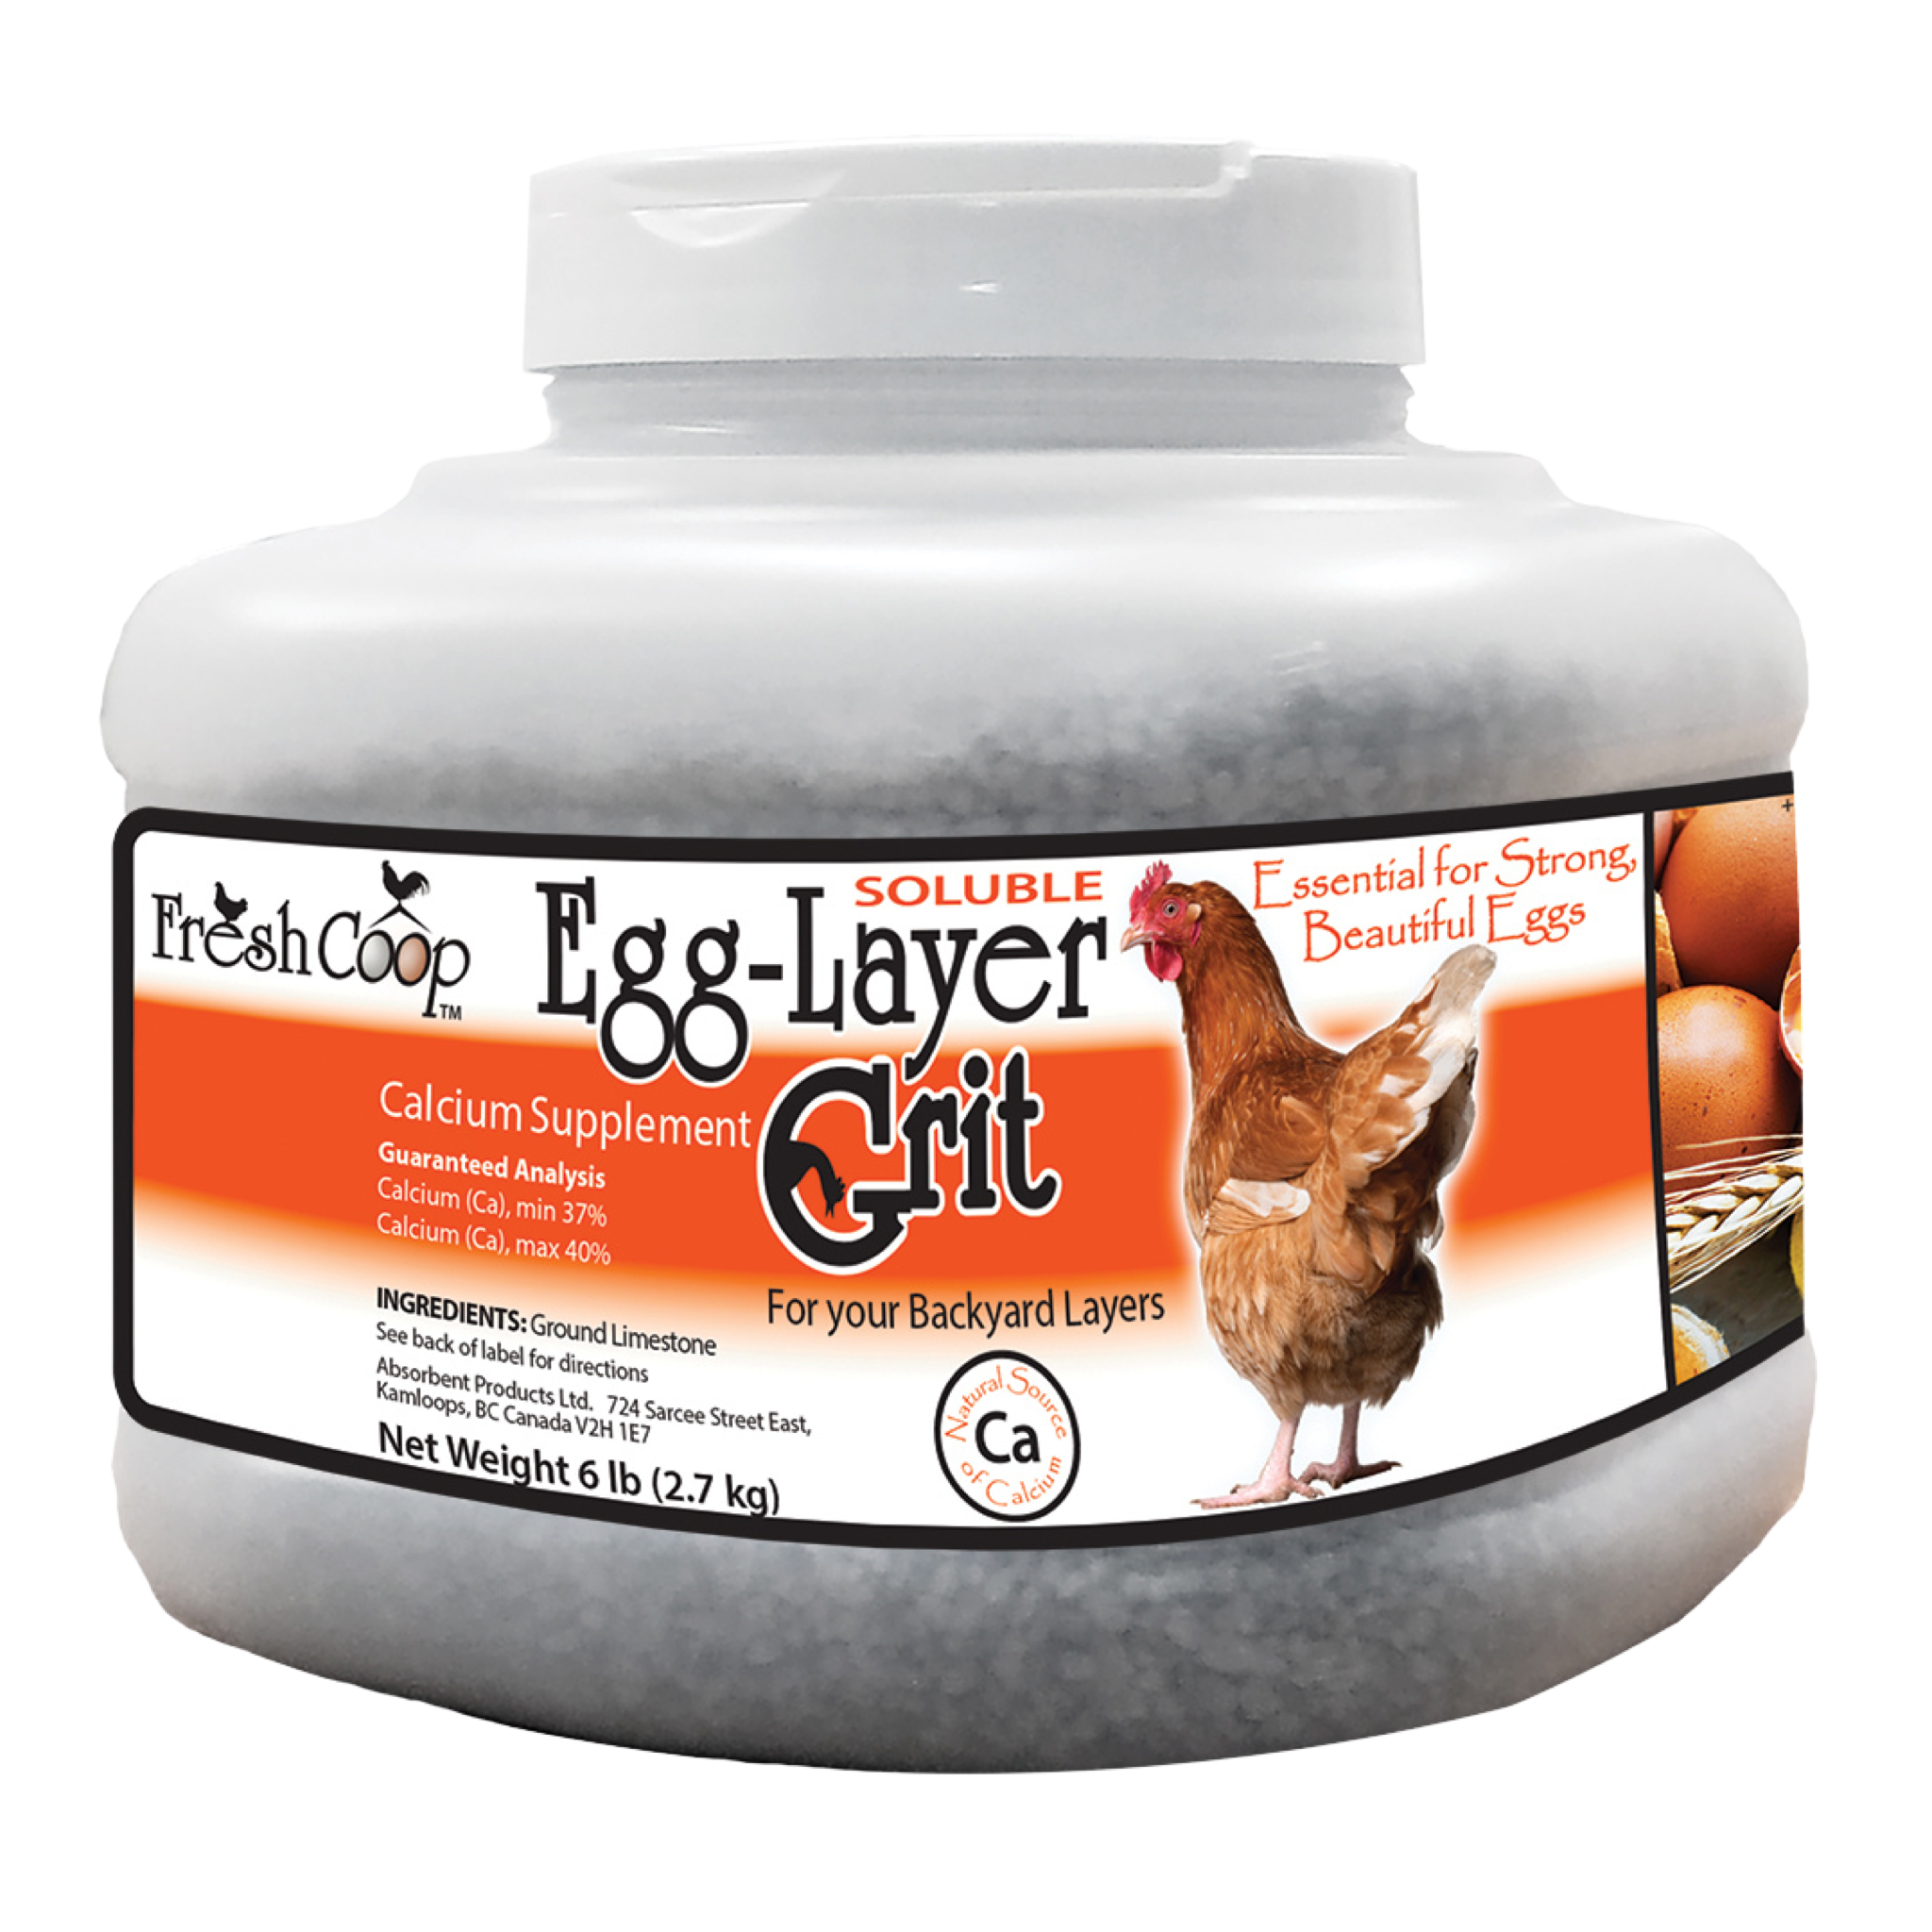 Absorbent Chicken Egg Layer Grit for Better Poultry Egg Production | Calcium Limestone Supplement for Layers | Organic and Easy to Pour 6 lb Jug. Must Need Supplies